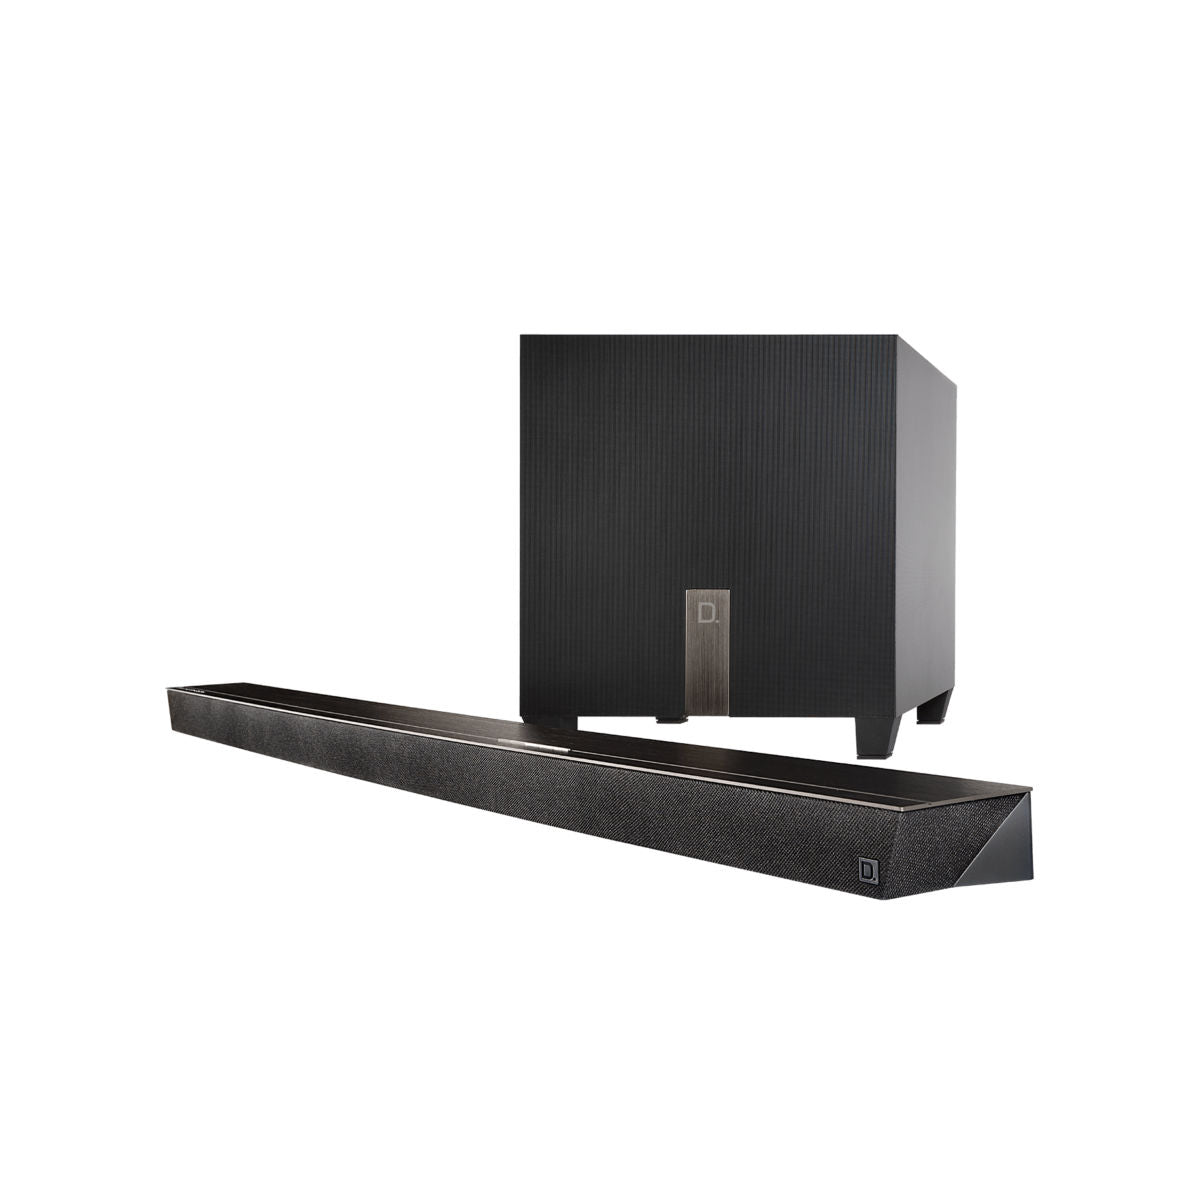 Definitive Technology Studio Slim 3.1 Channel Sound Bar with Chromecast Built-in - Ooberpad India